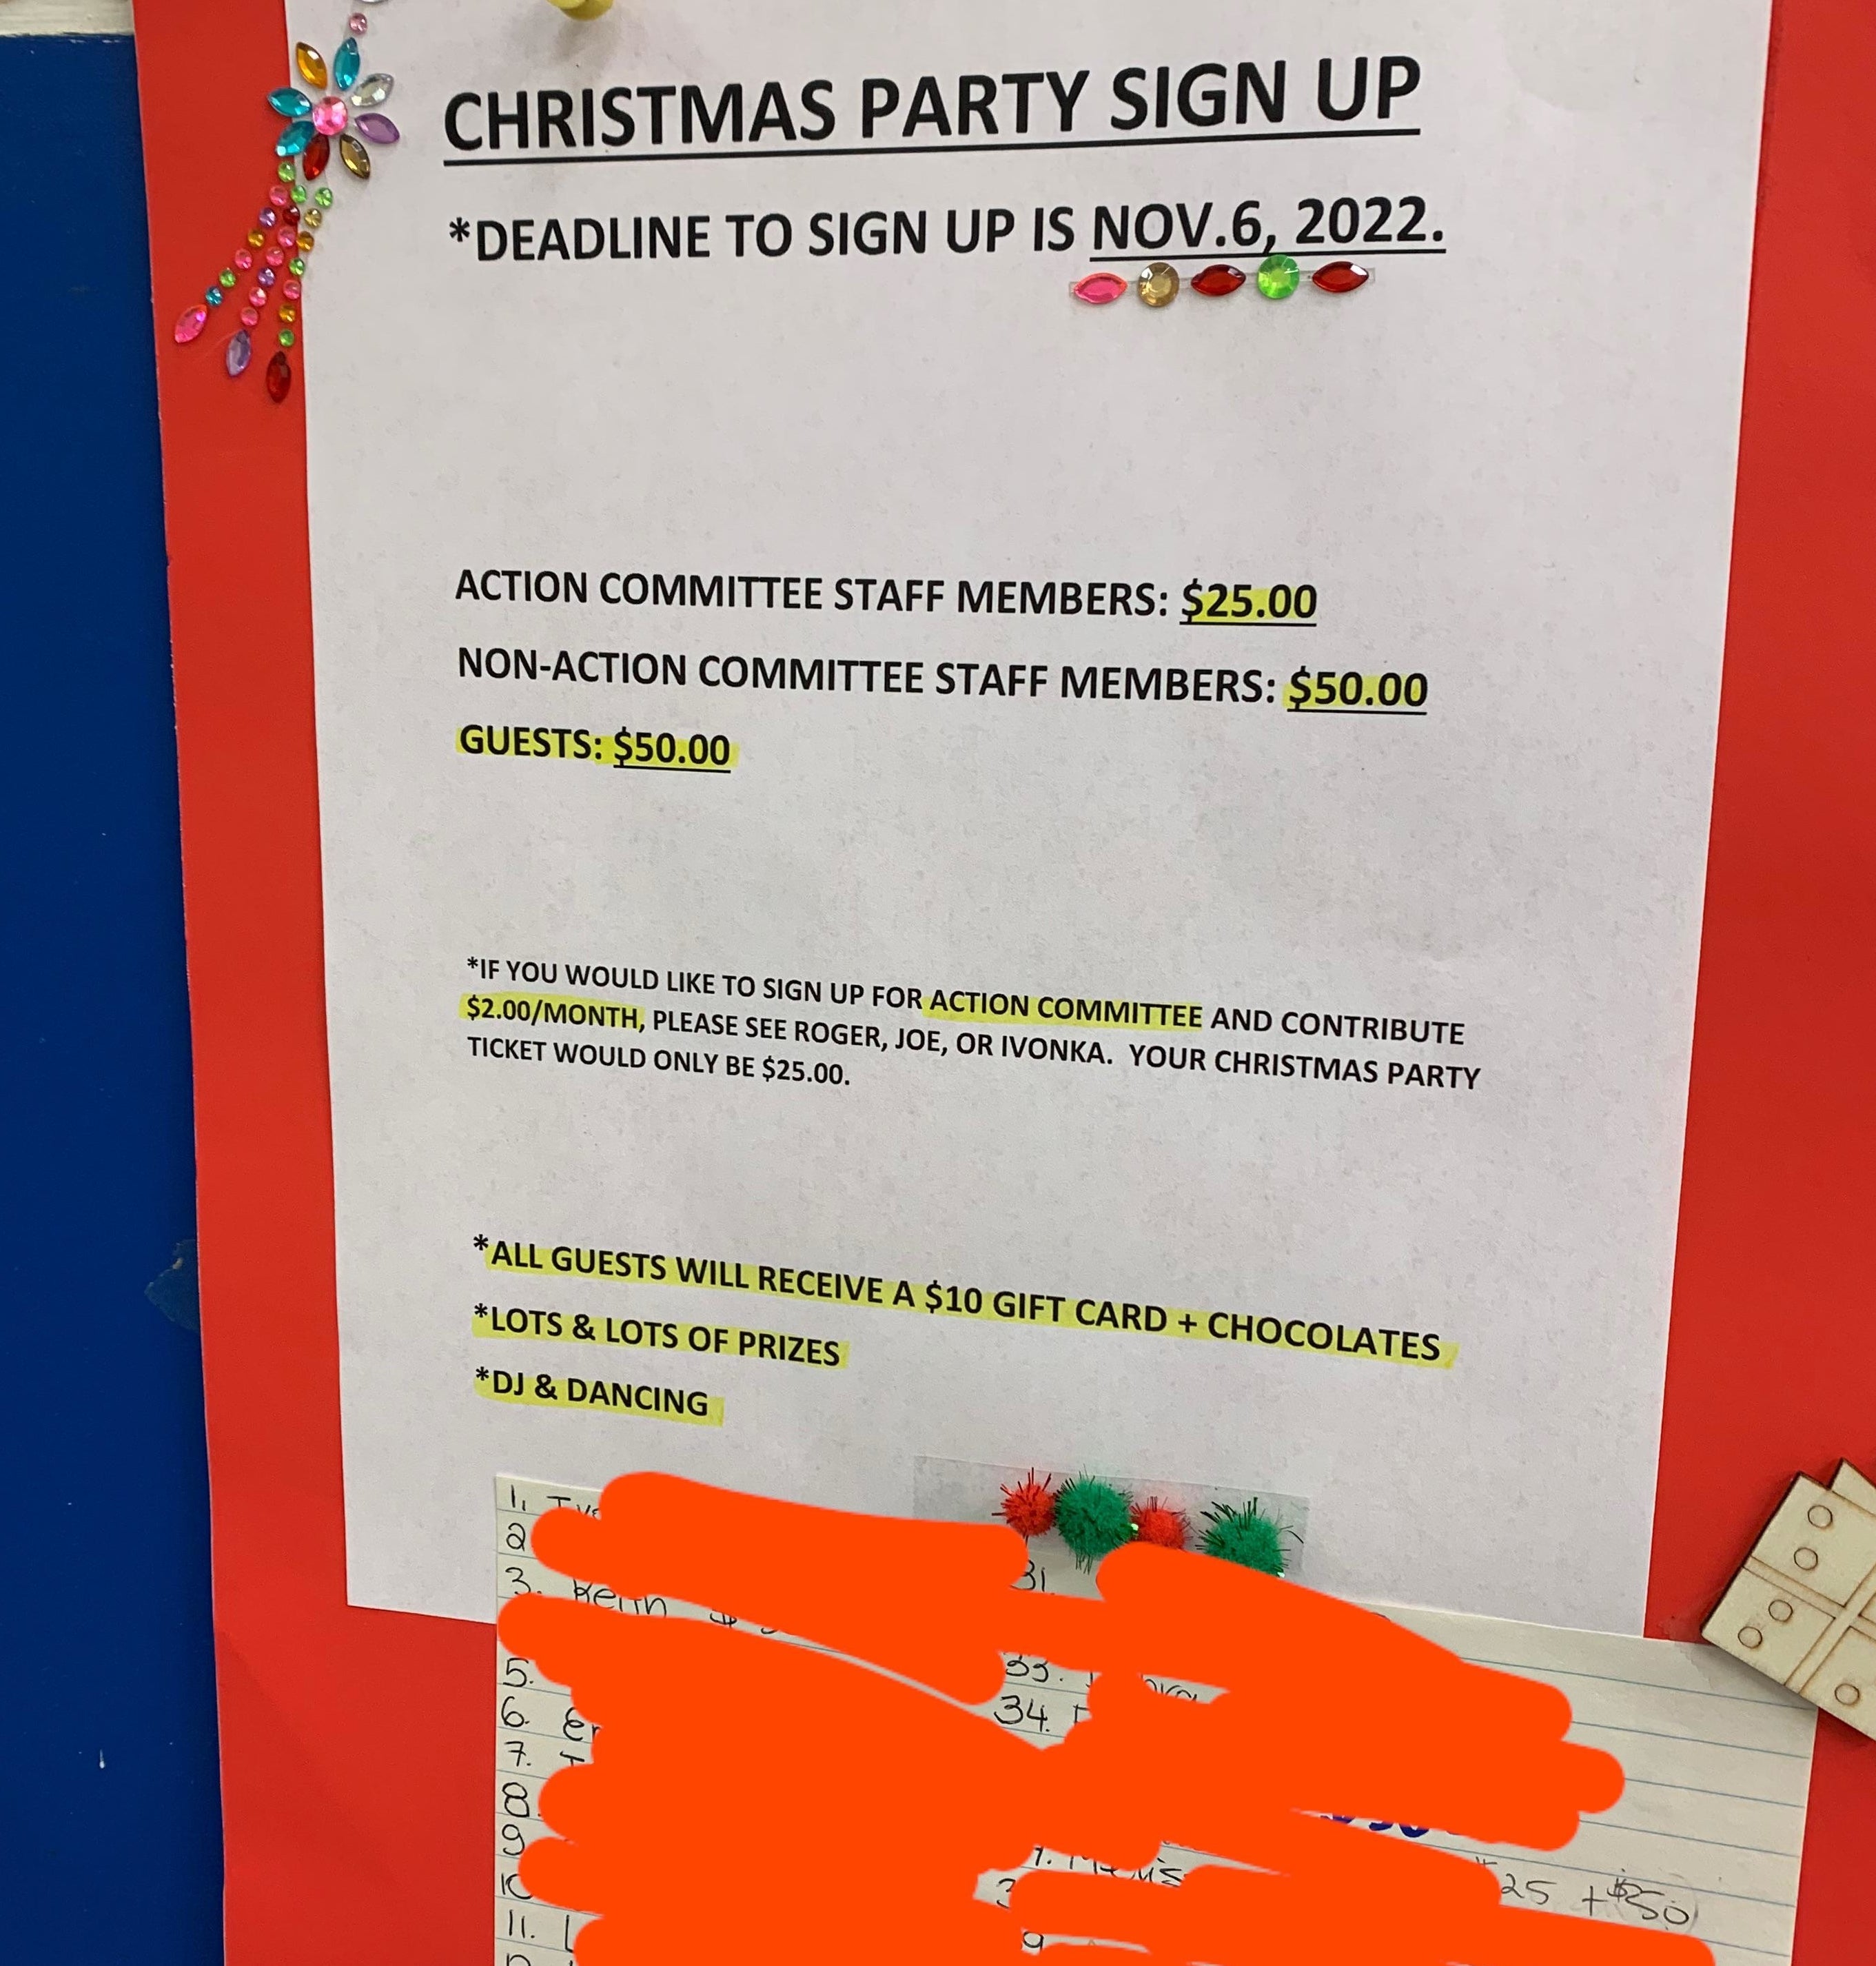 A notice for the Christmas party